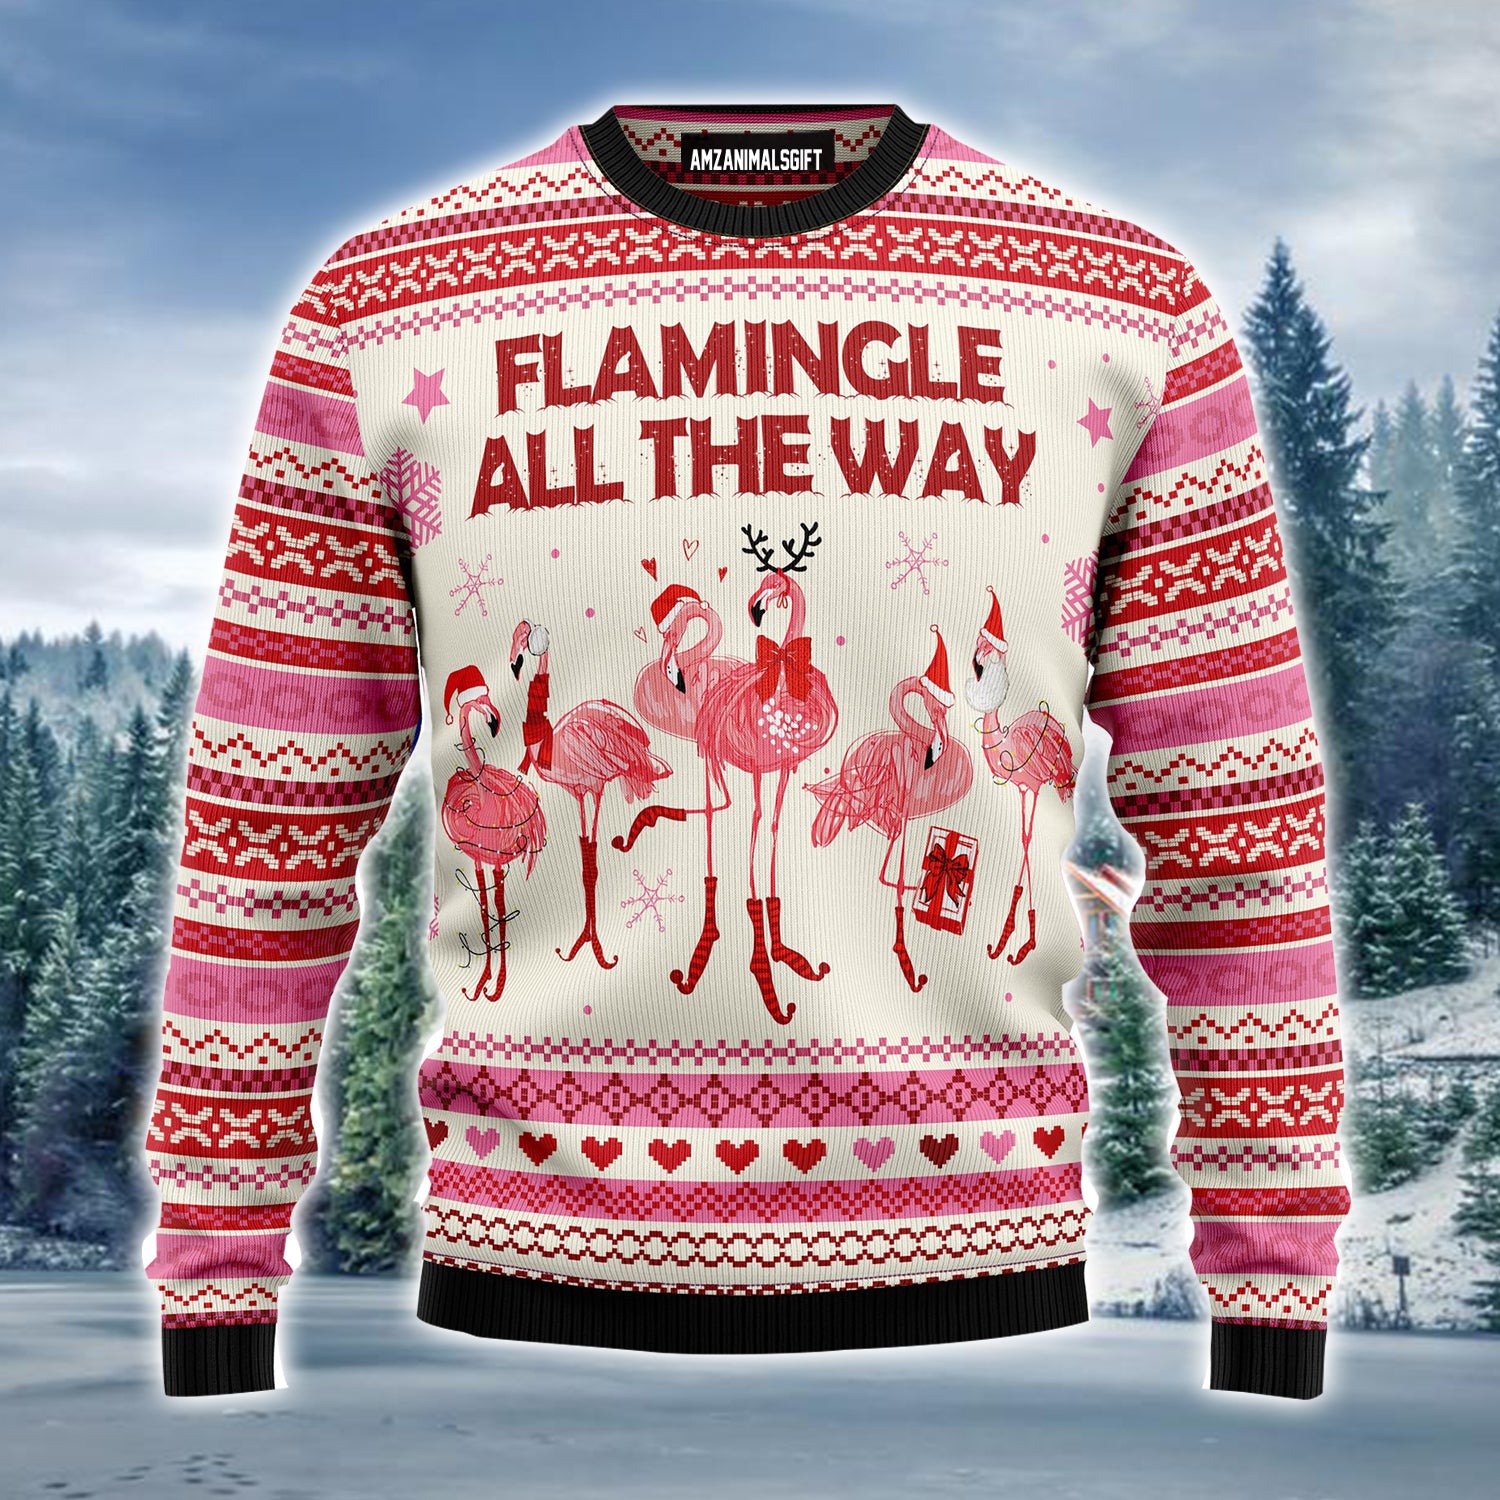 Flamingo Loves Xmas Ugly Christmas Sweater, Flamingle All The Ways Ugly Sweater For Men & Women - Best Gift For Christmas, Flamingo Lovers, Family